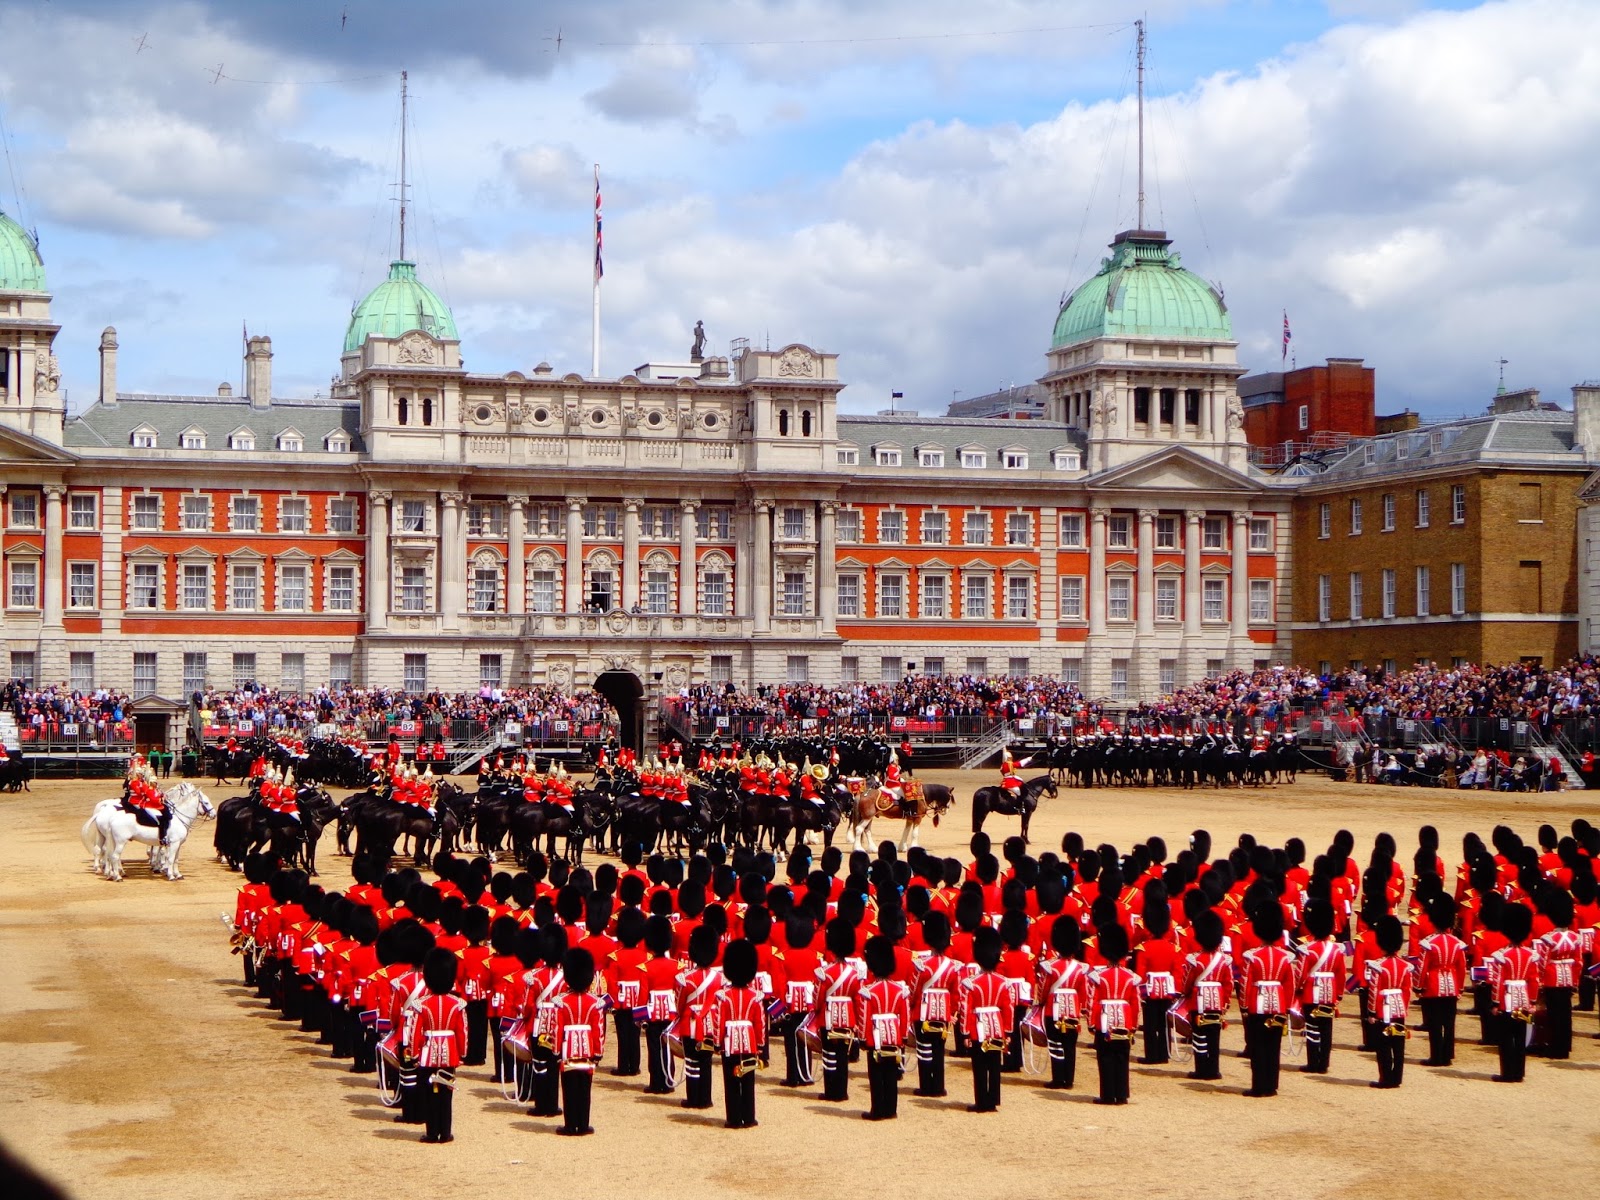 All You Need To Know About Trooping The Colour: Frequency And Significance